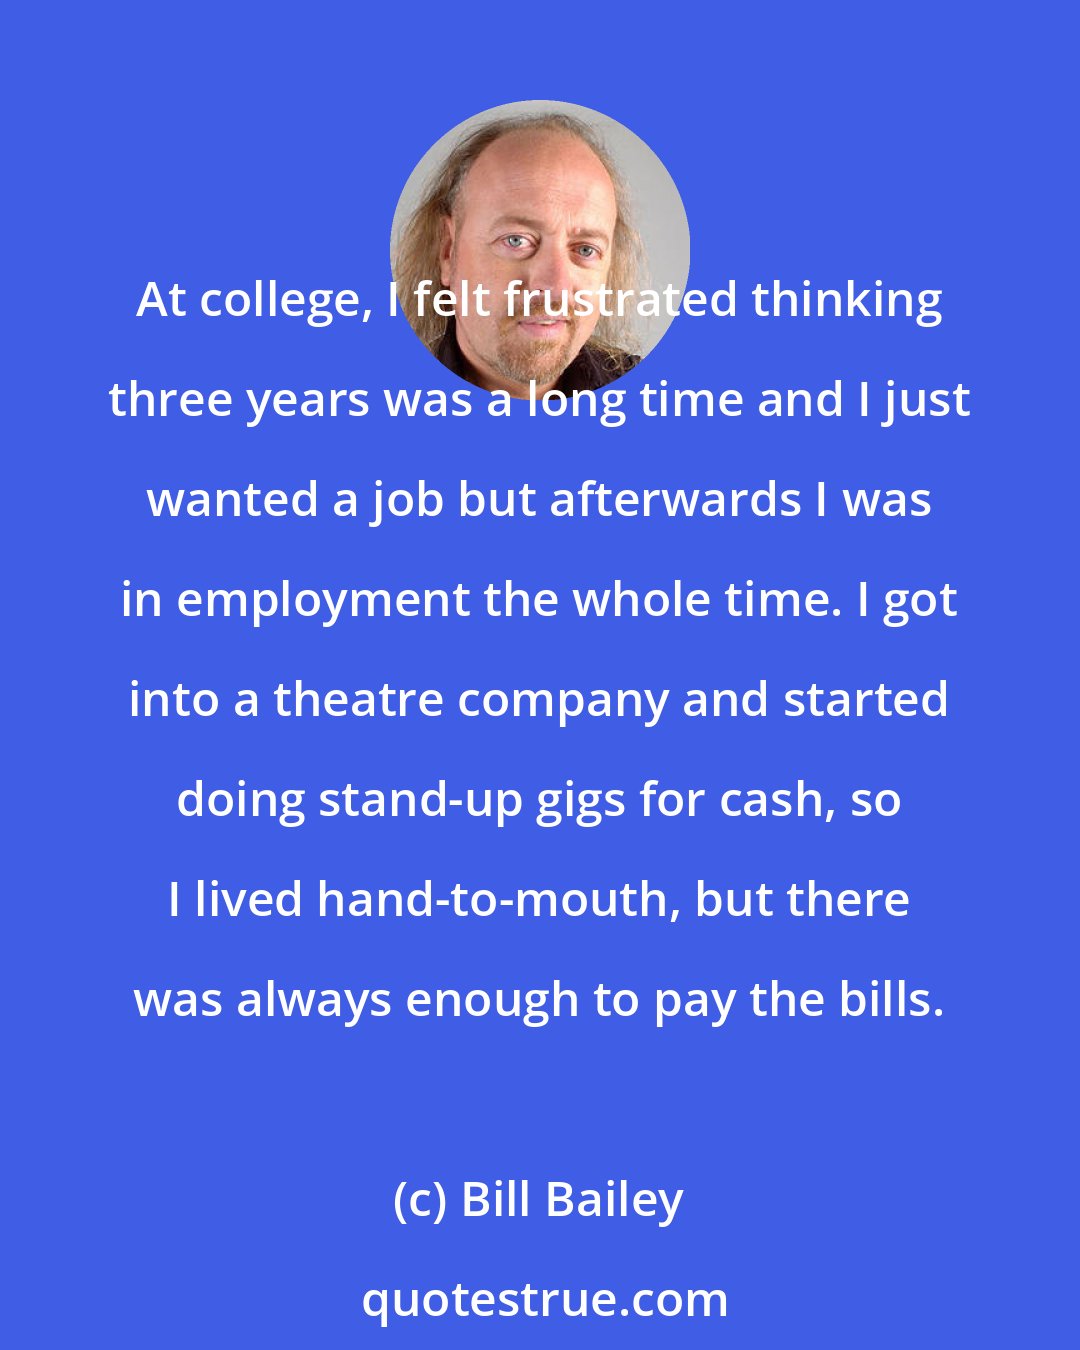 Bill Bailey: At college, I felt frustrated thinking three years was a long time and I just wanted a job but afterwards I was in employment the whole time. I got into a theatre company and started doing stand-up gigs for cash, so I lived hand-to-mouth, but there was always enough to pay the bills.